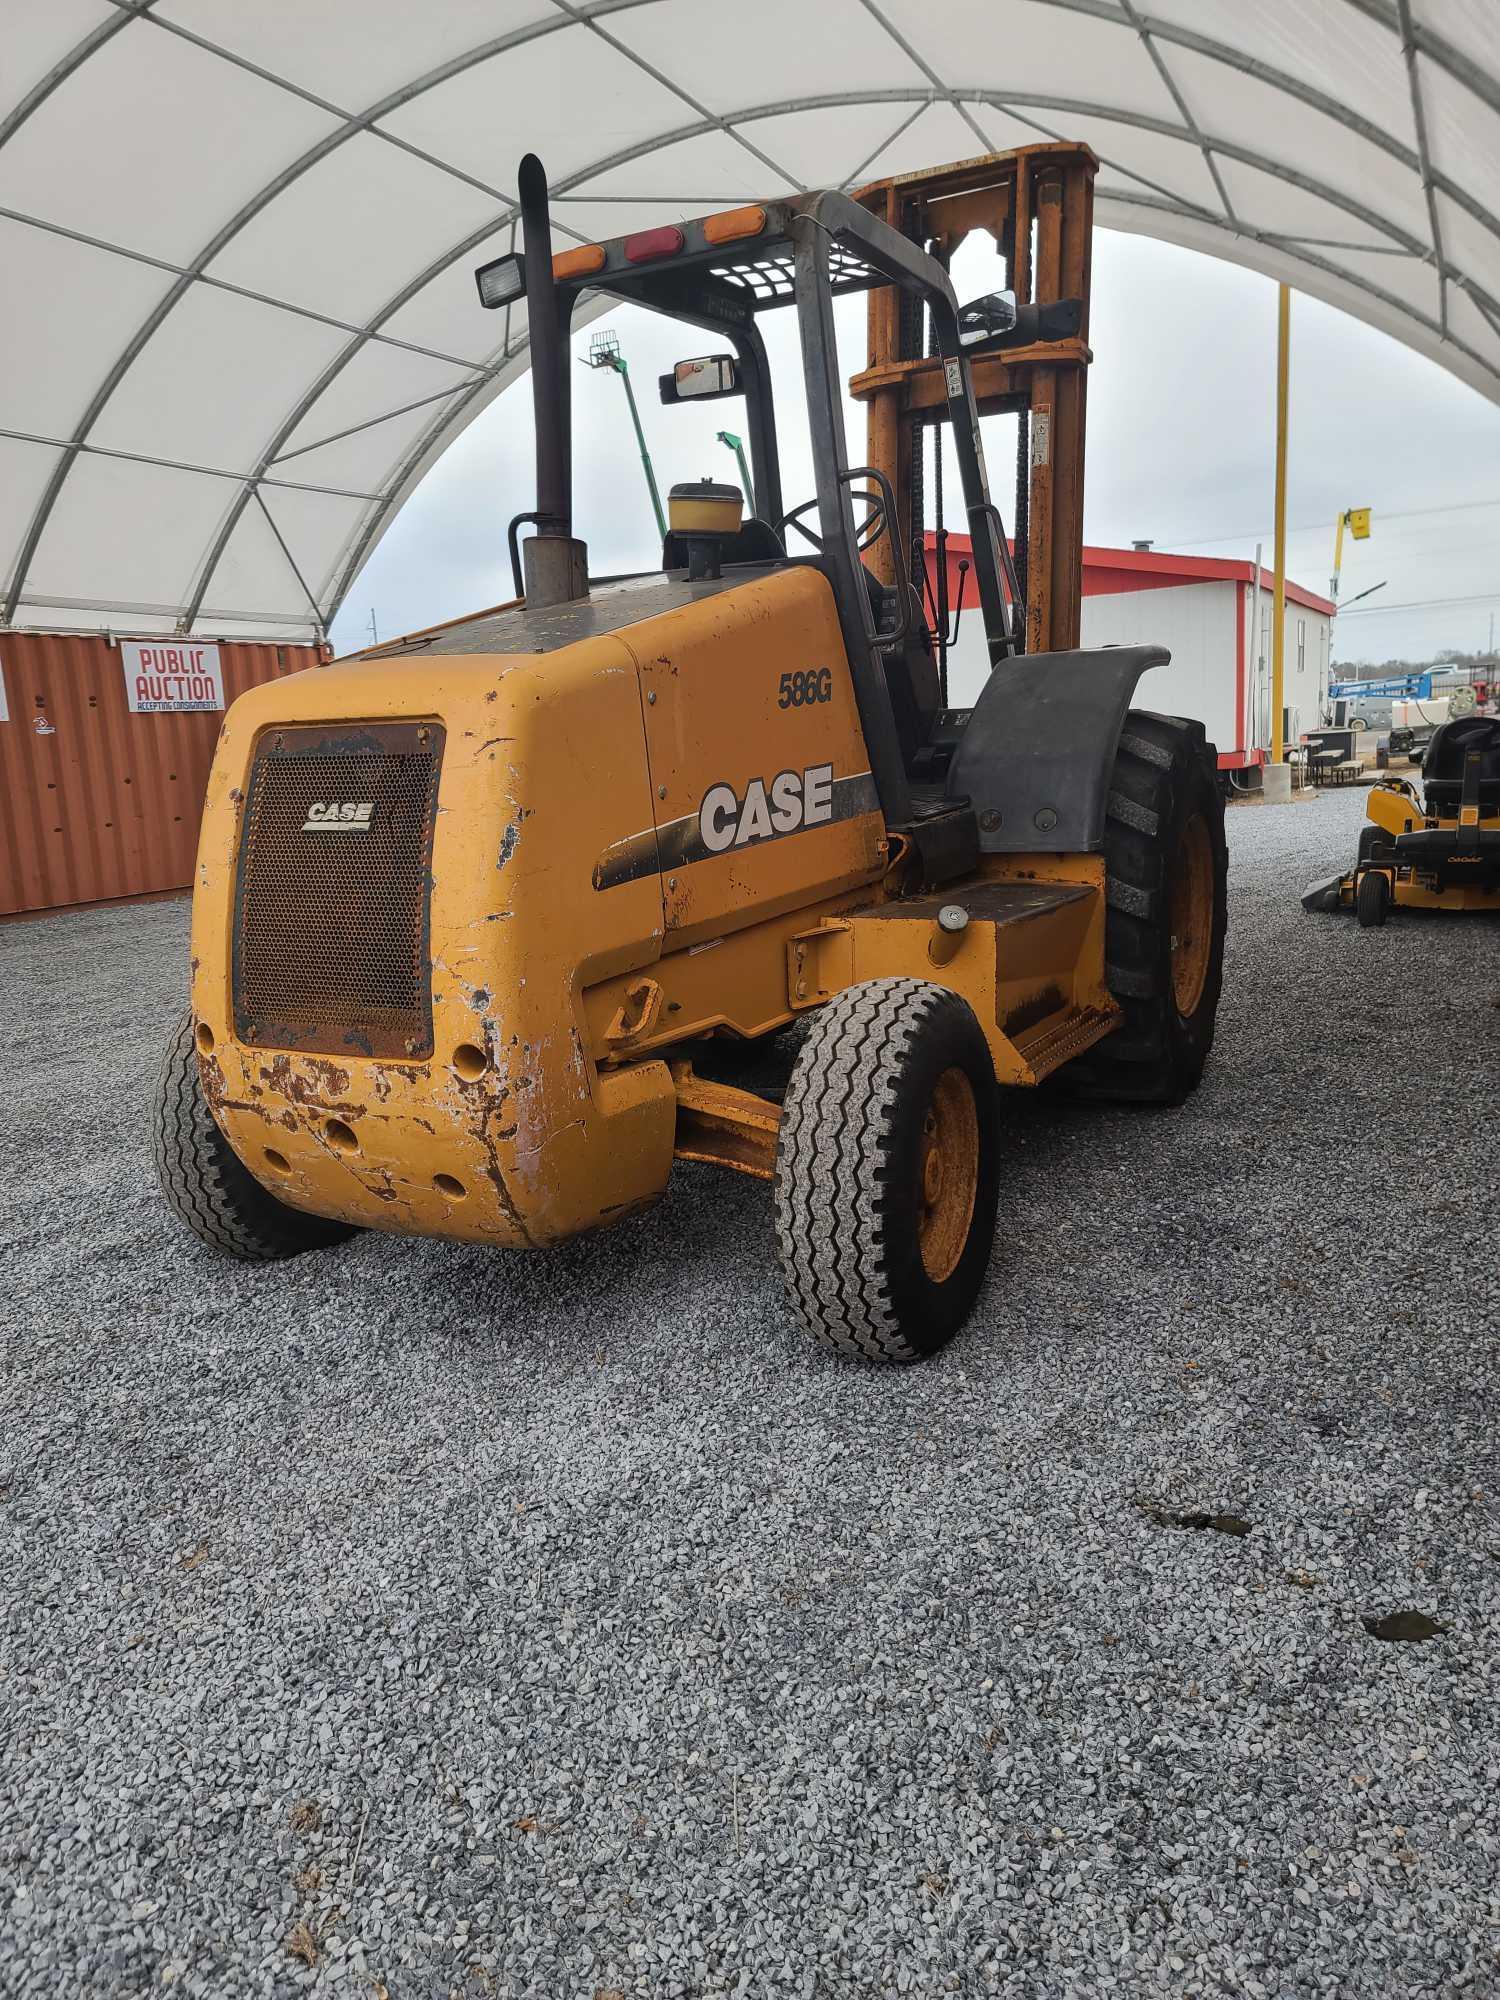 2005 Case forklift 586g Max Lift 6,000lbs